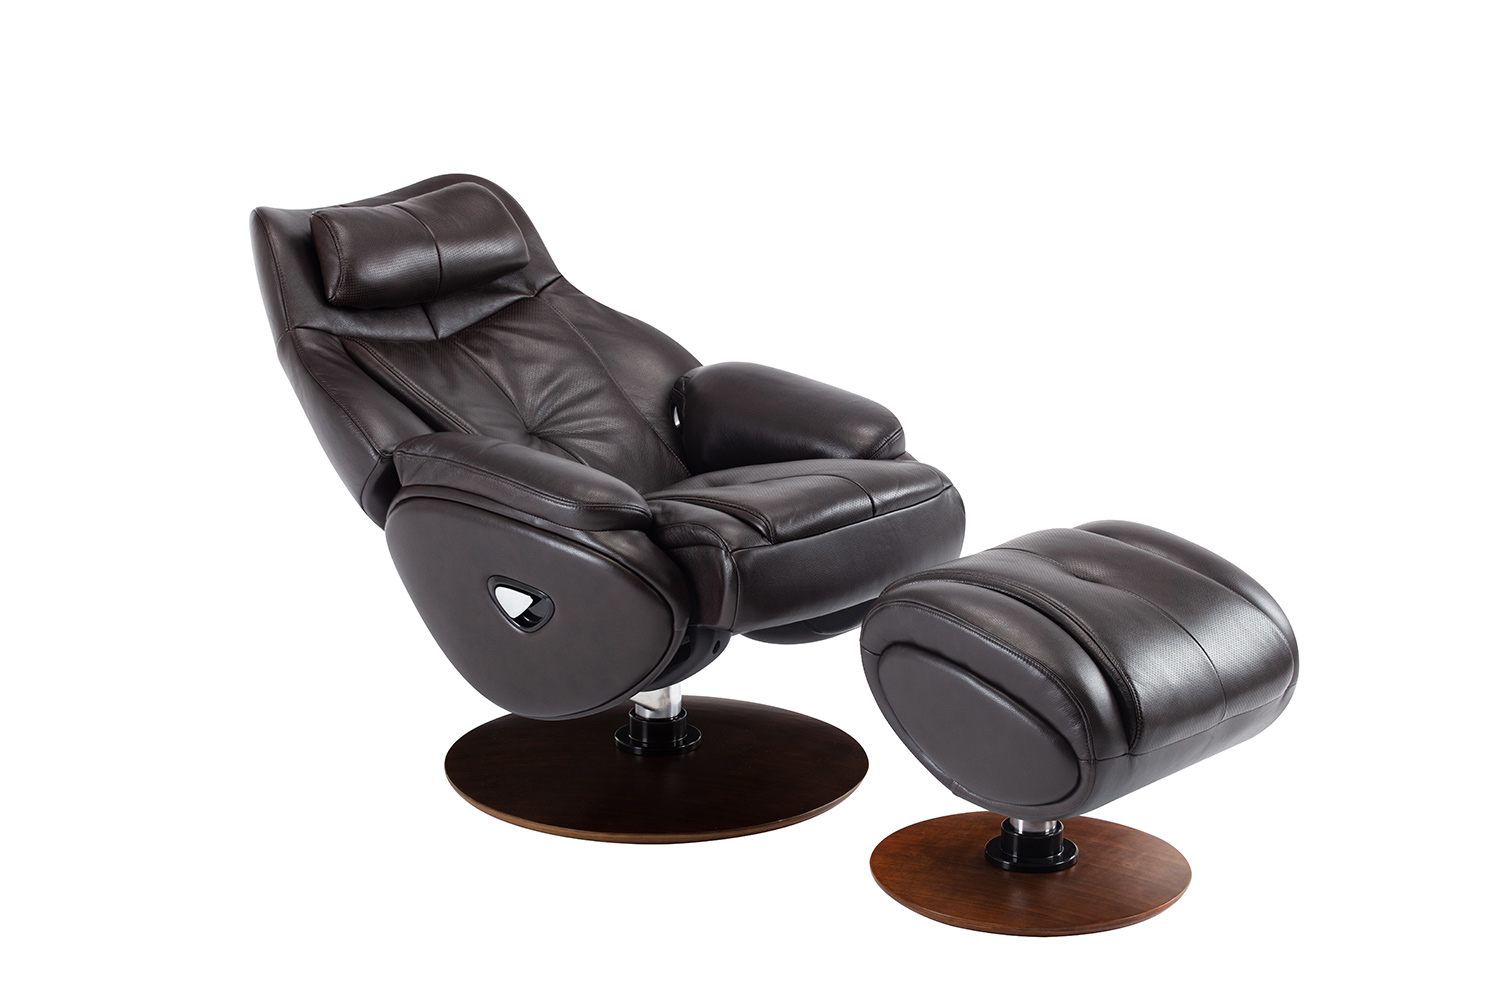 Barcalounger Marjon Pedestal Recliner Chair and Ottoman - Janie Chocolate/Leather match